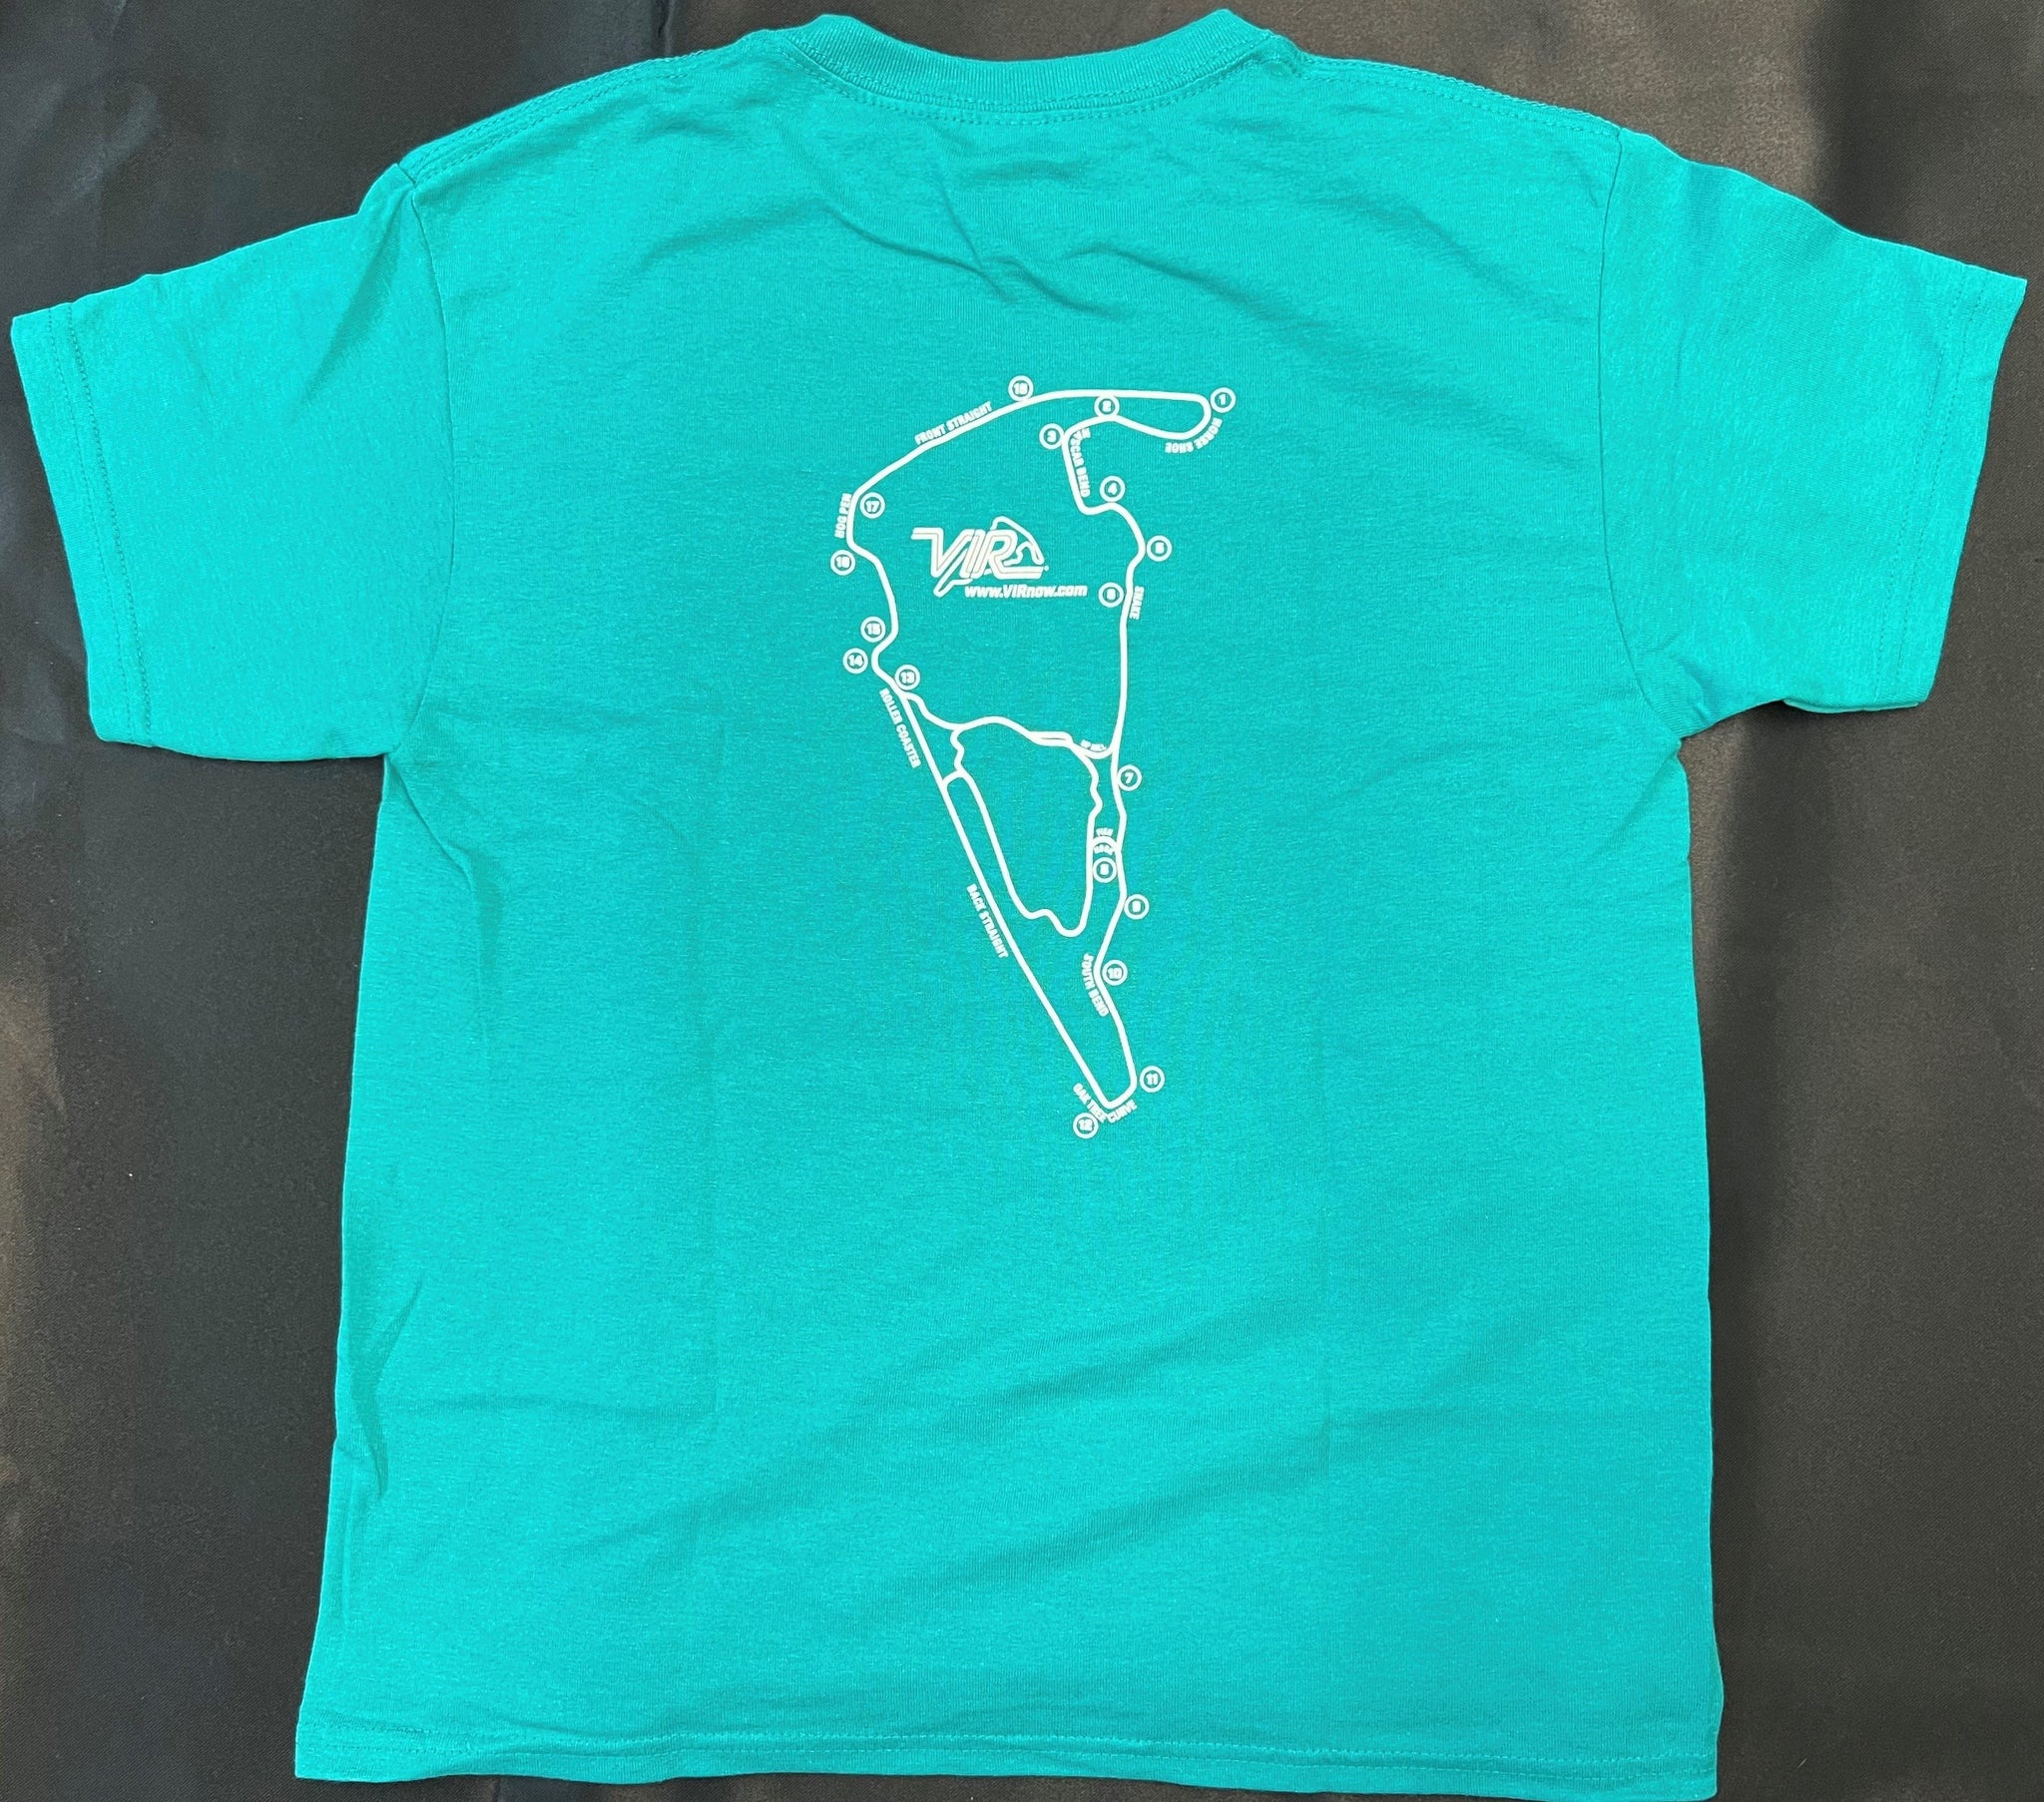 VIR YOUTH Track Map Tee (Size: S - L)